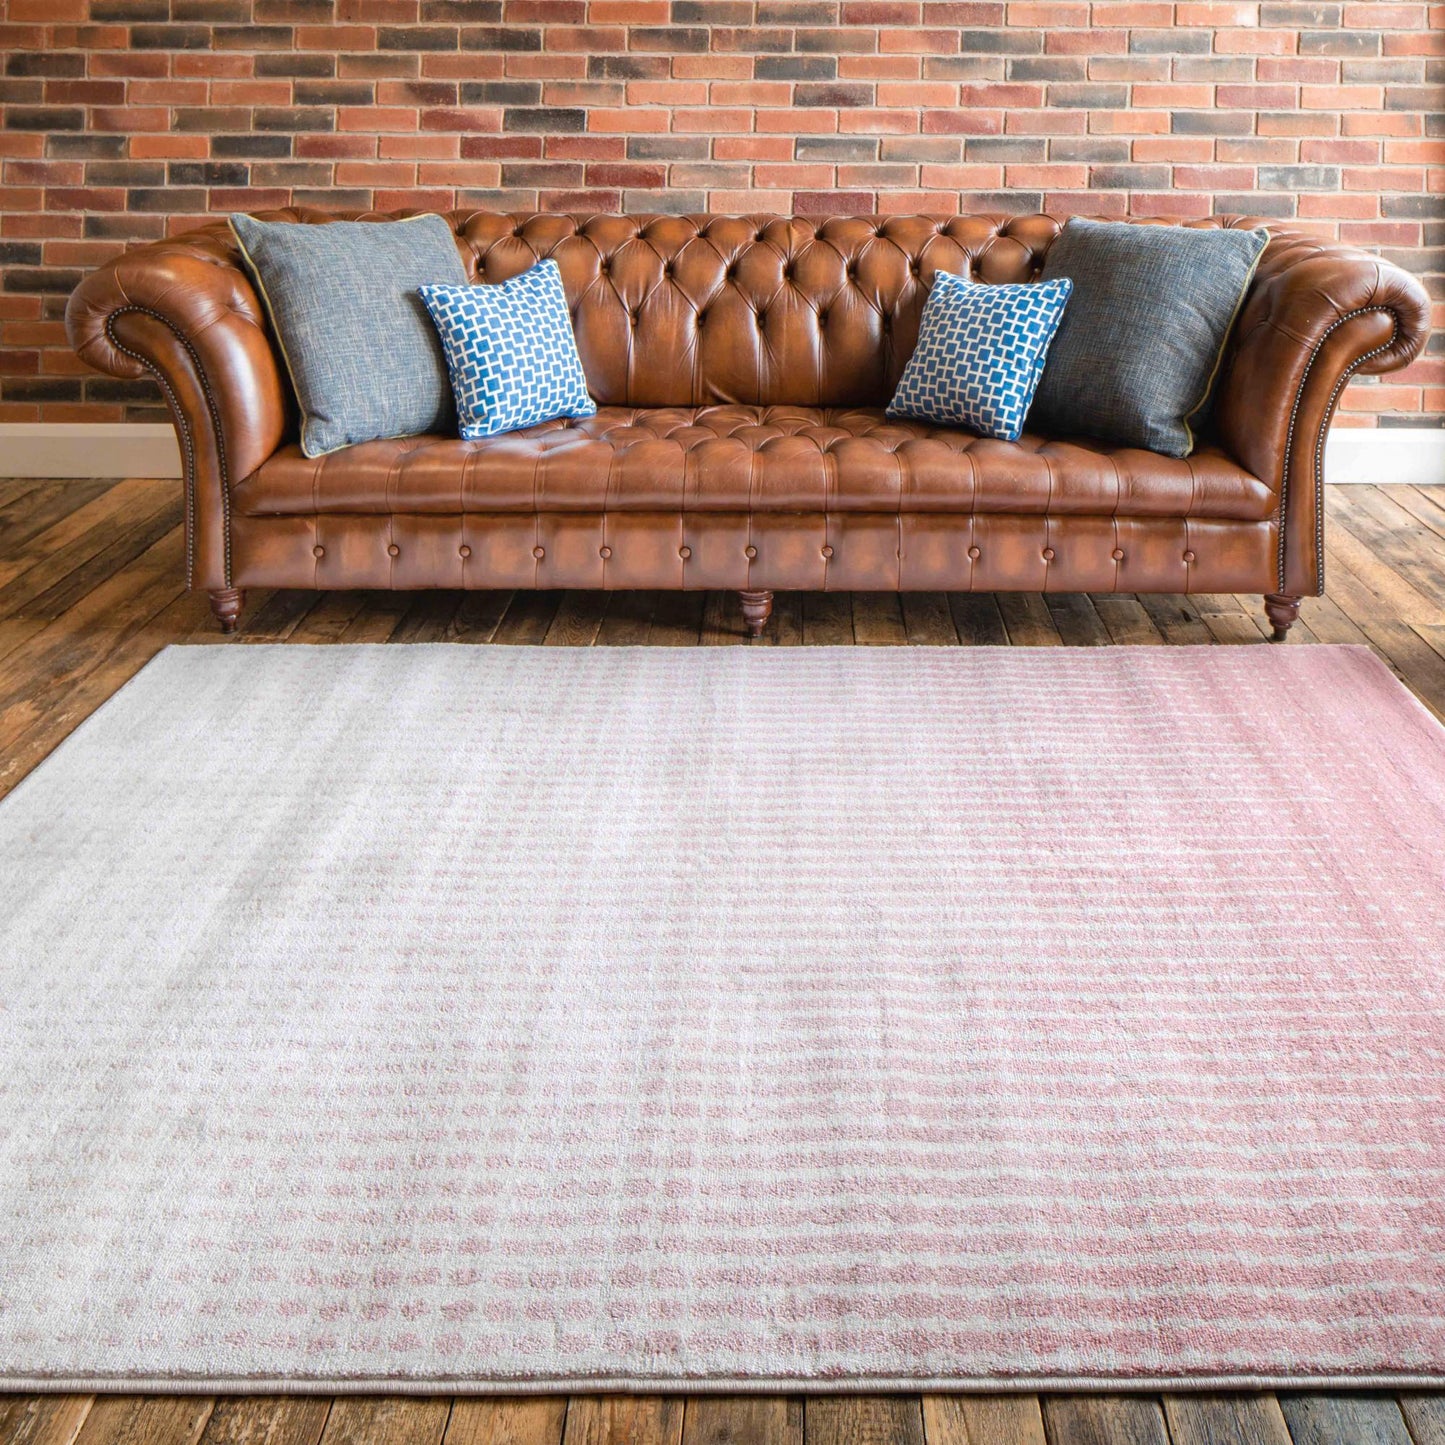 Modern Blush Spotted Ombre Effect Hall Runner Rug